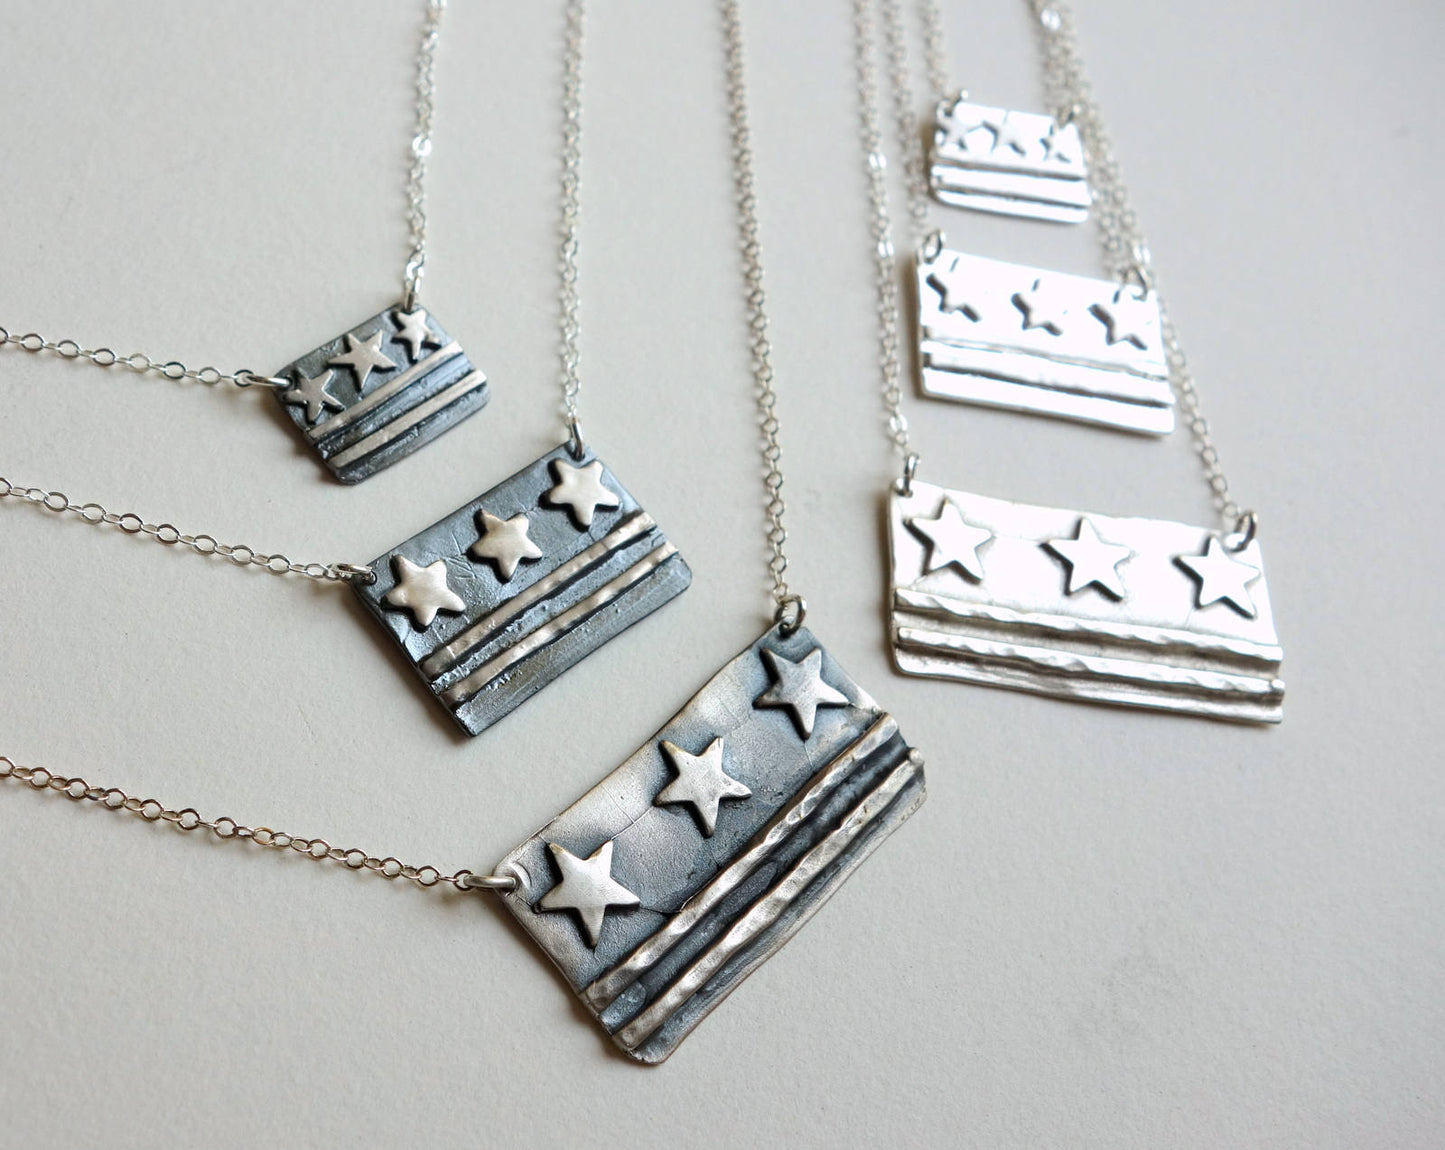 Sterling Silver DC Flag Necklaces - Small, Medium, Large sizes - DC Pride, Made in DC, District of Columbia Flag